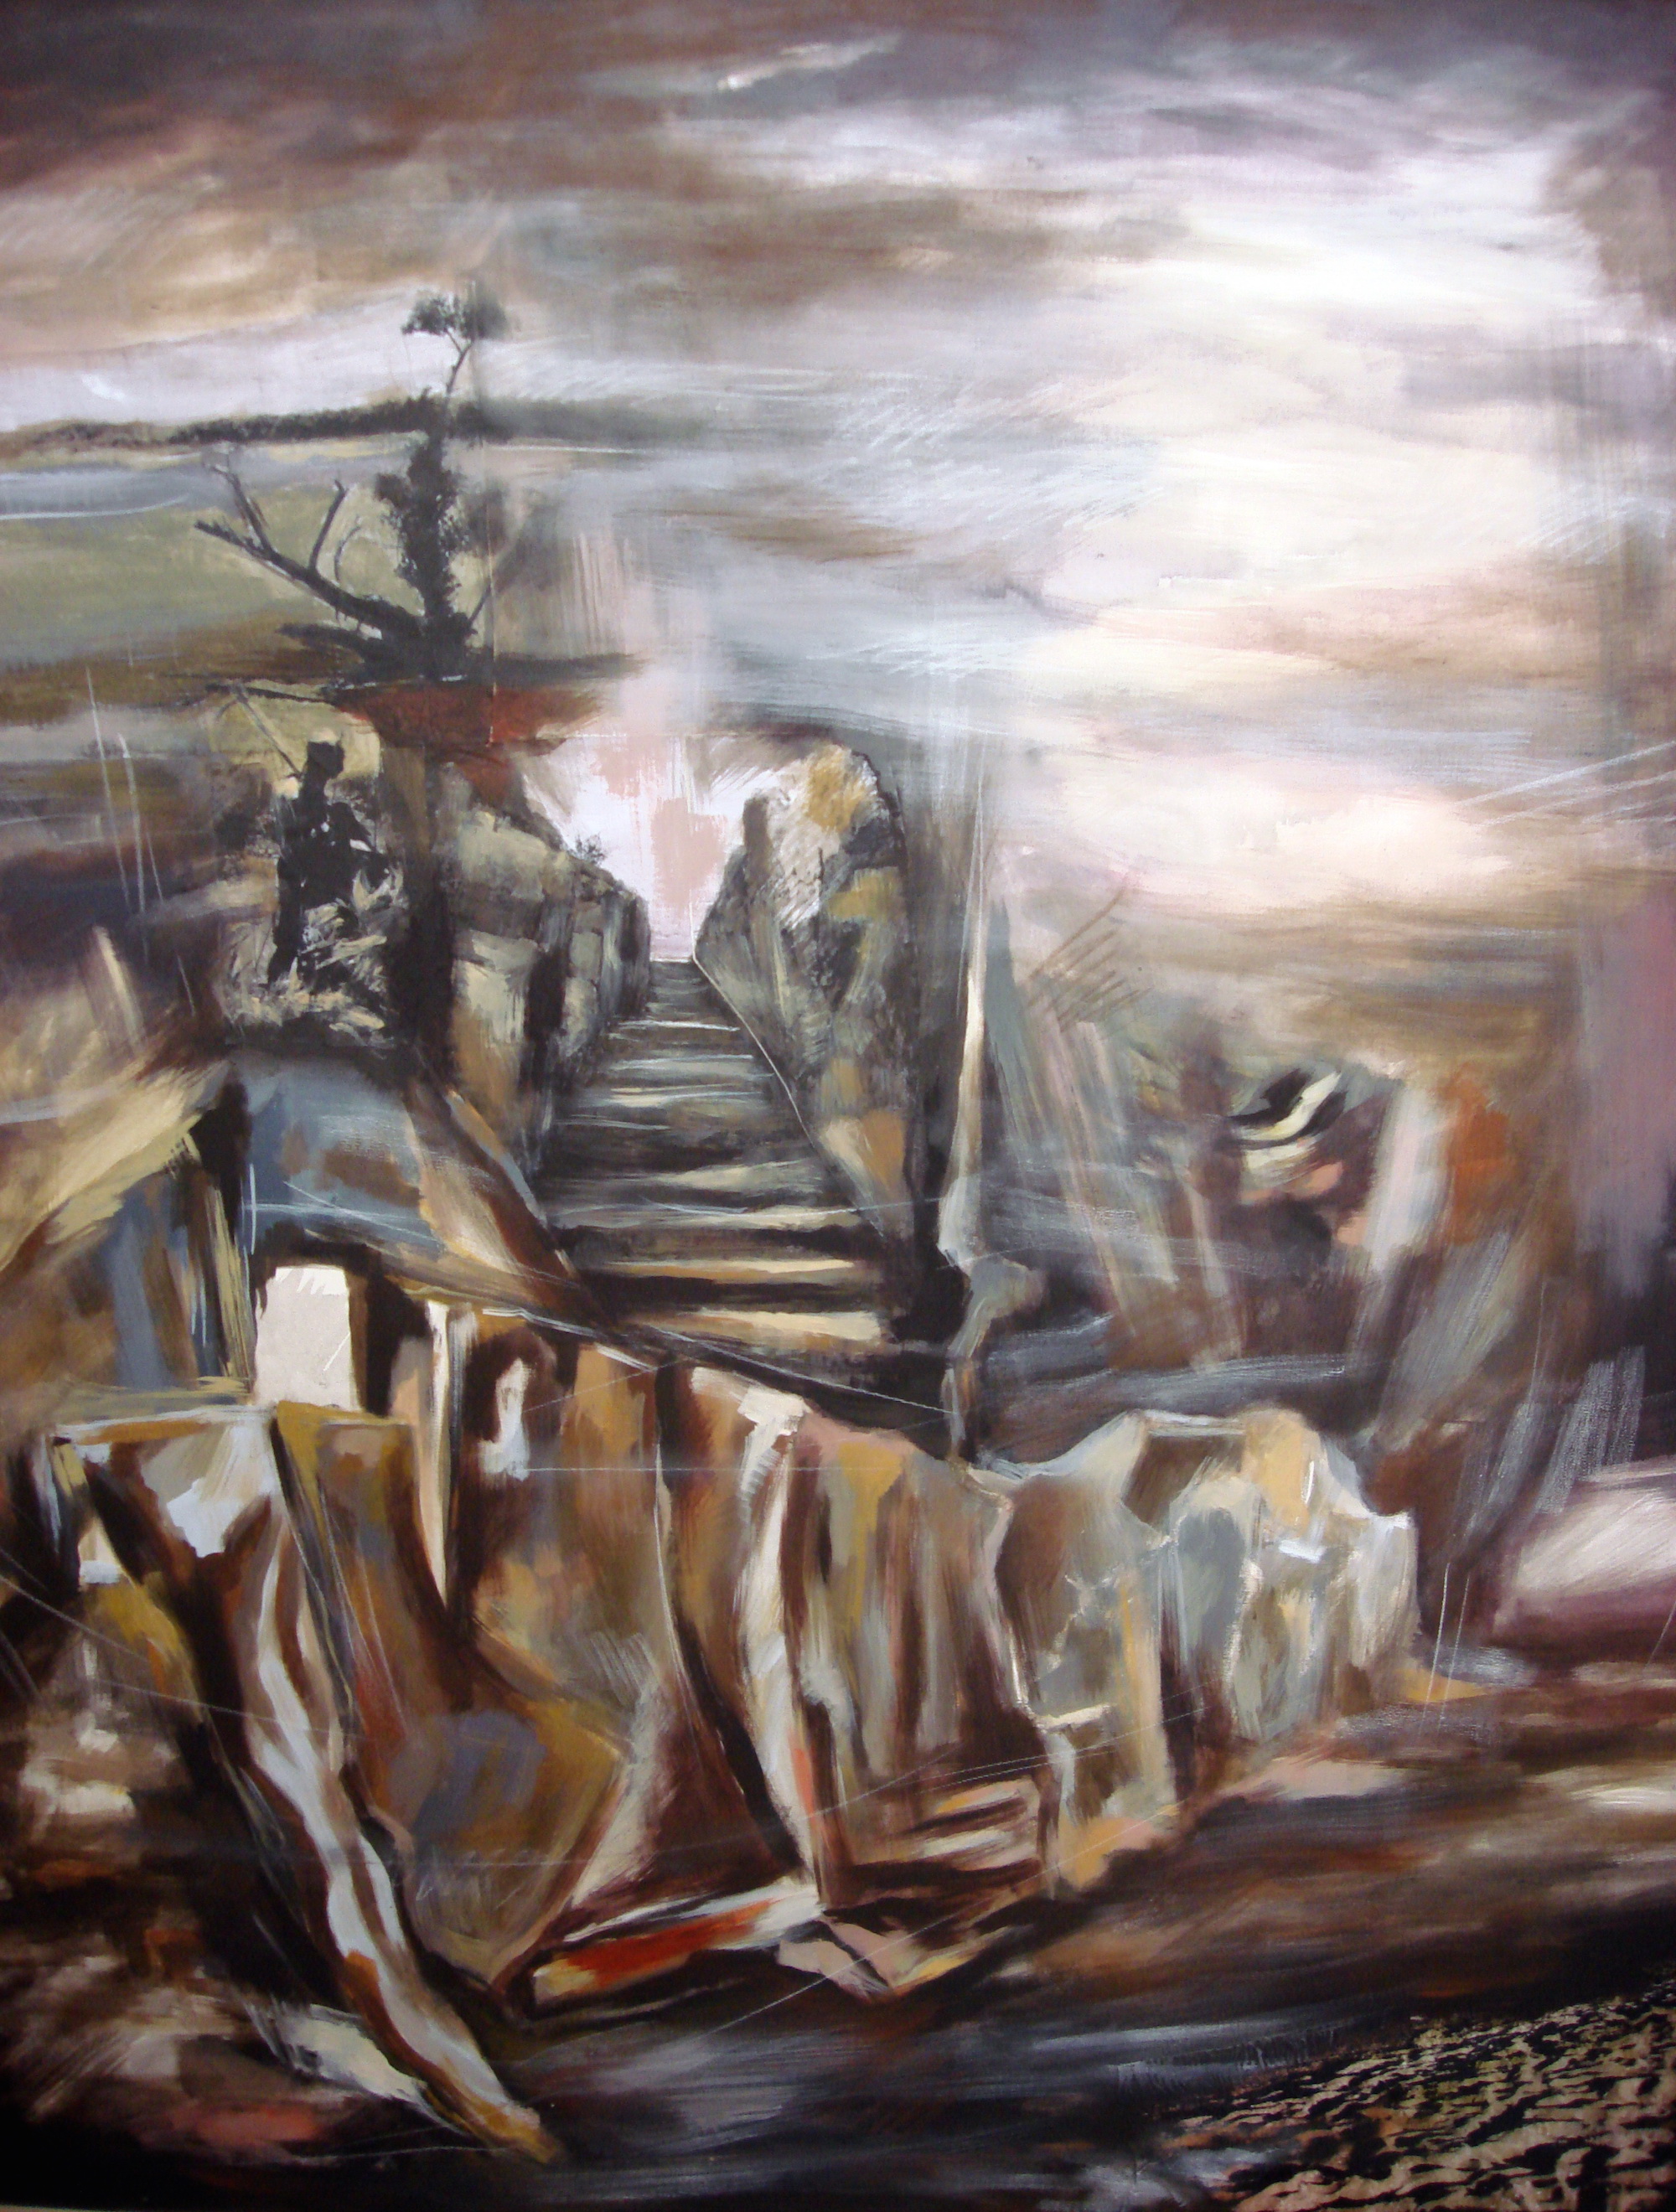 Untitled, mixed media on canvas, 55x47 inches, 2008